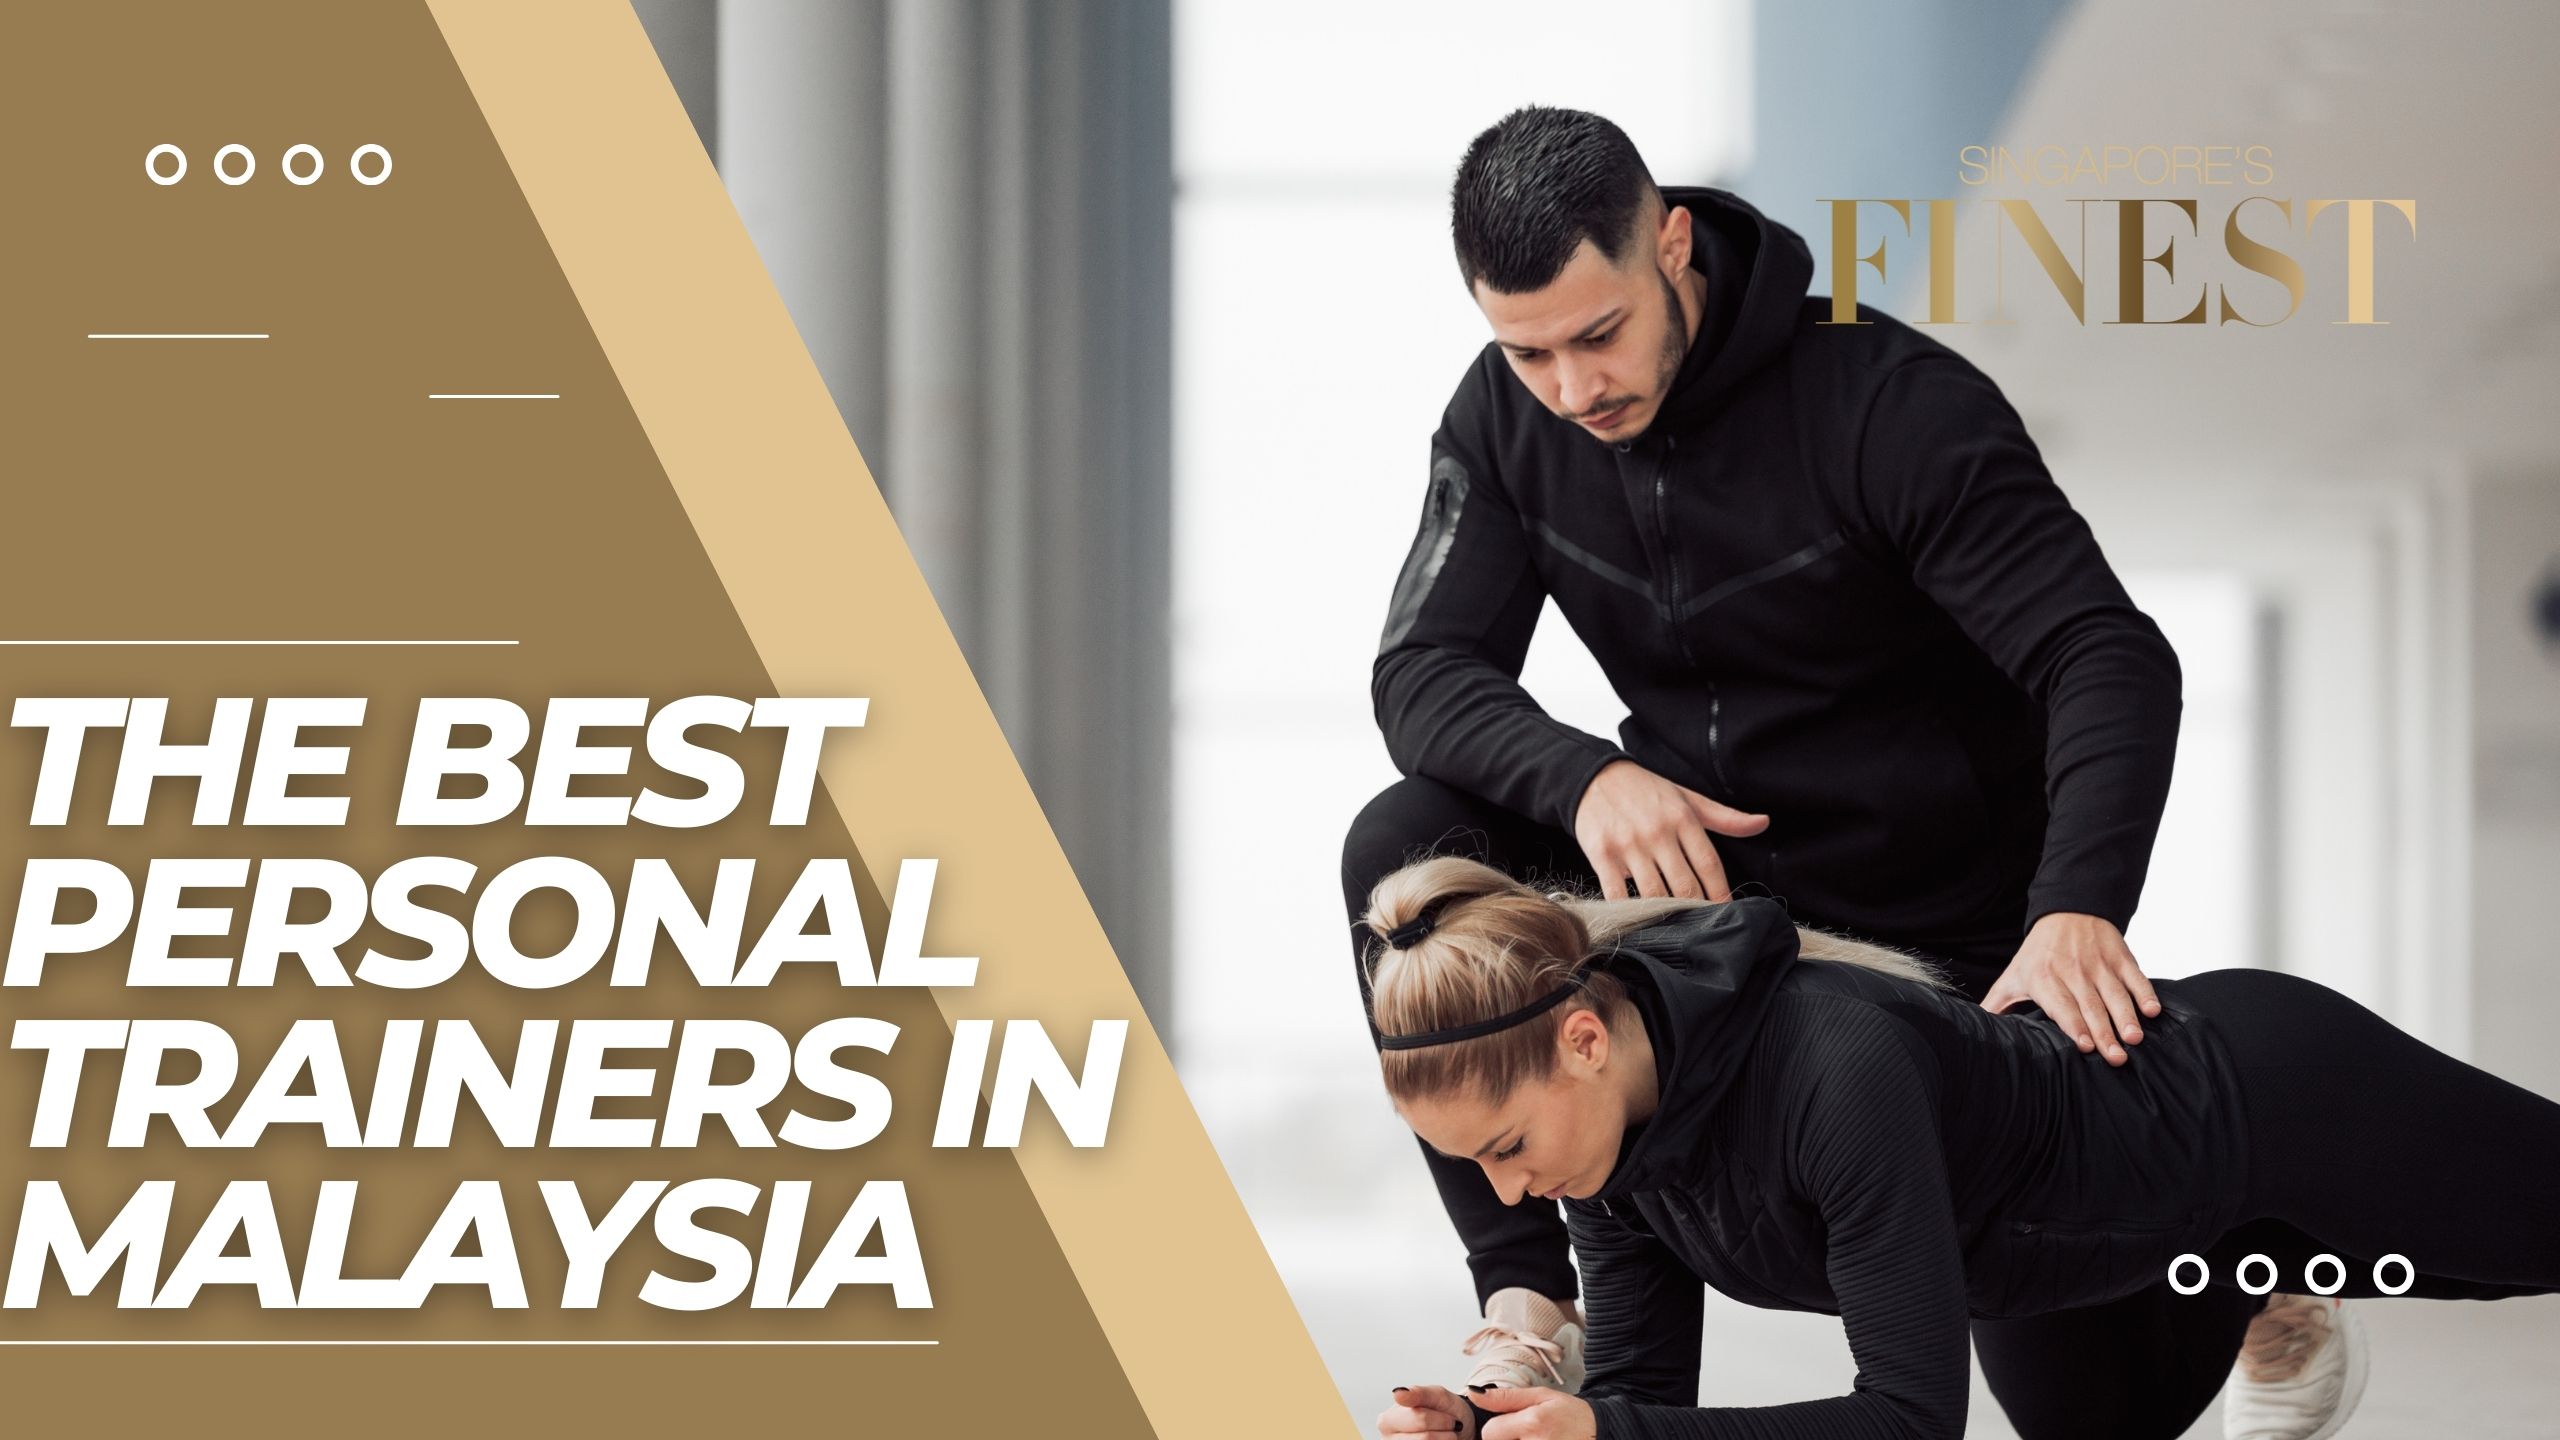 The Finest Personal Trainers in Malaysia